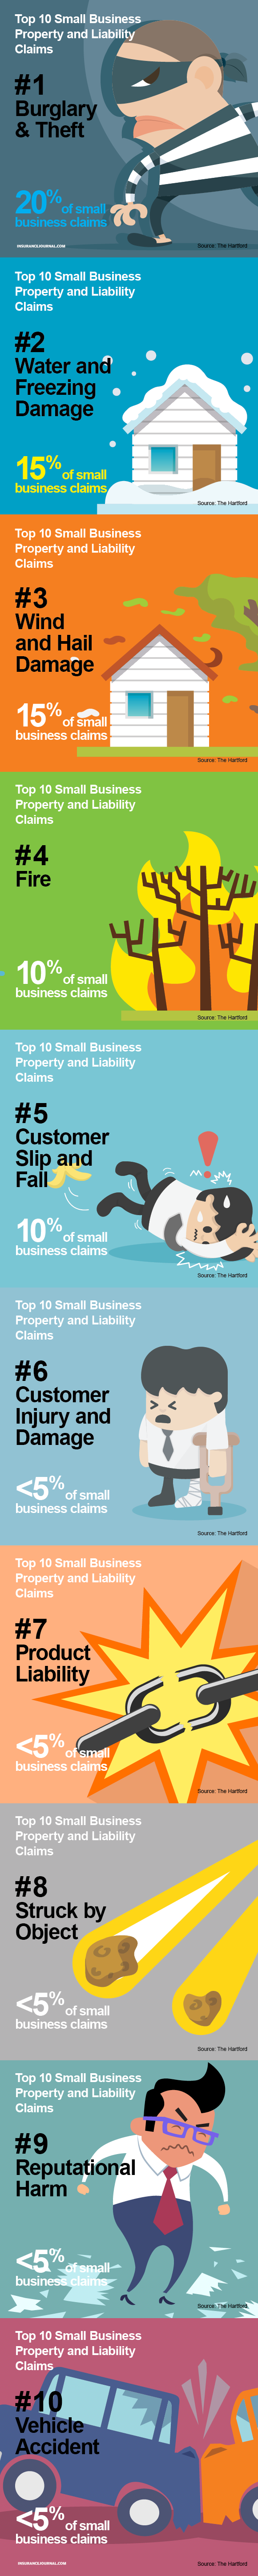 top 10 small business claims